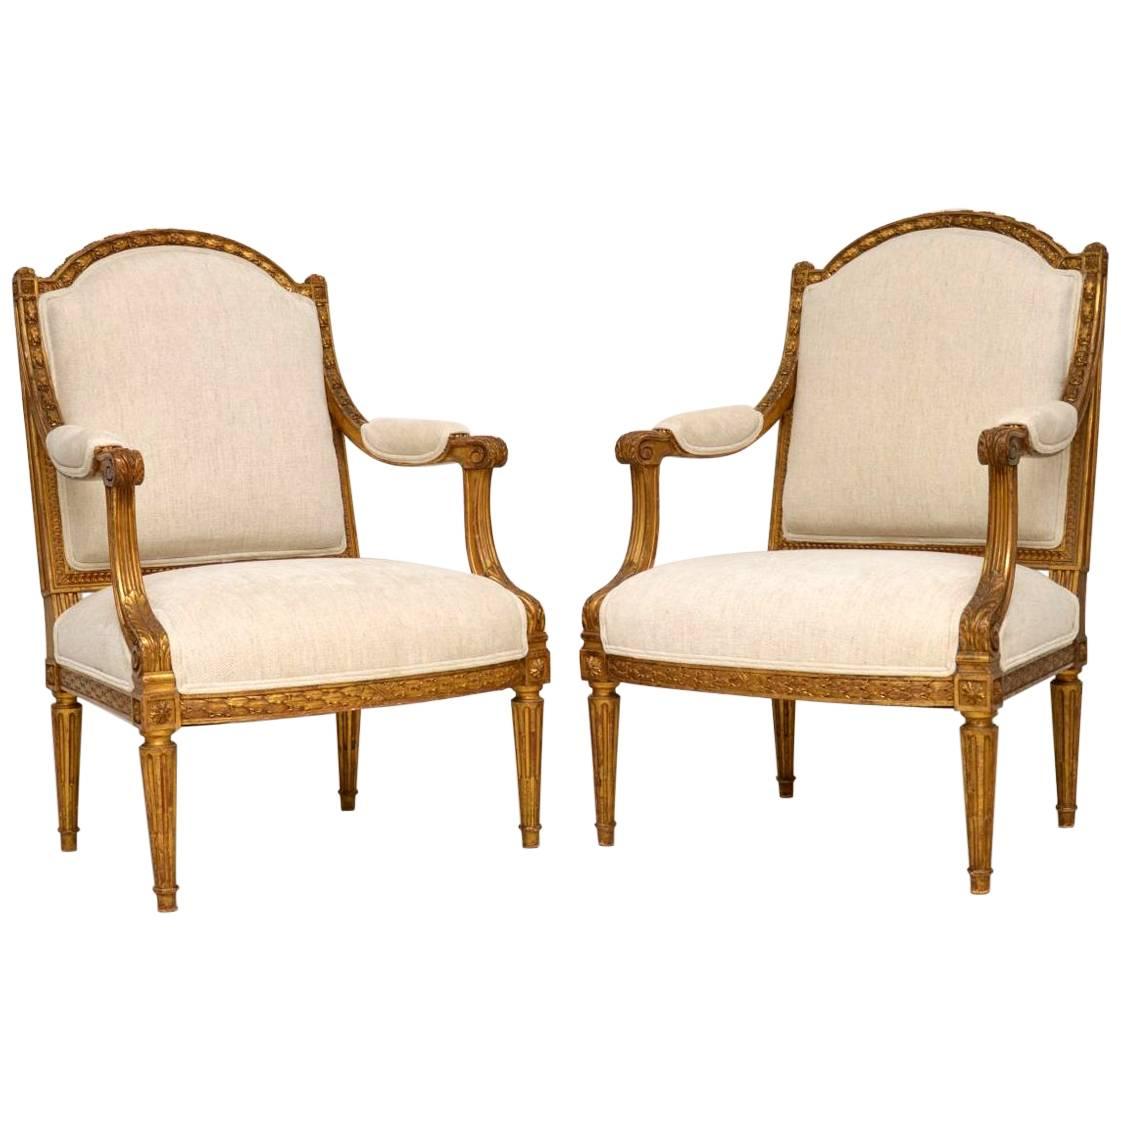 Pair of Antique French Giltwood Armchairs